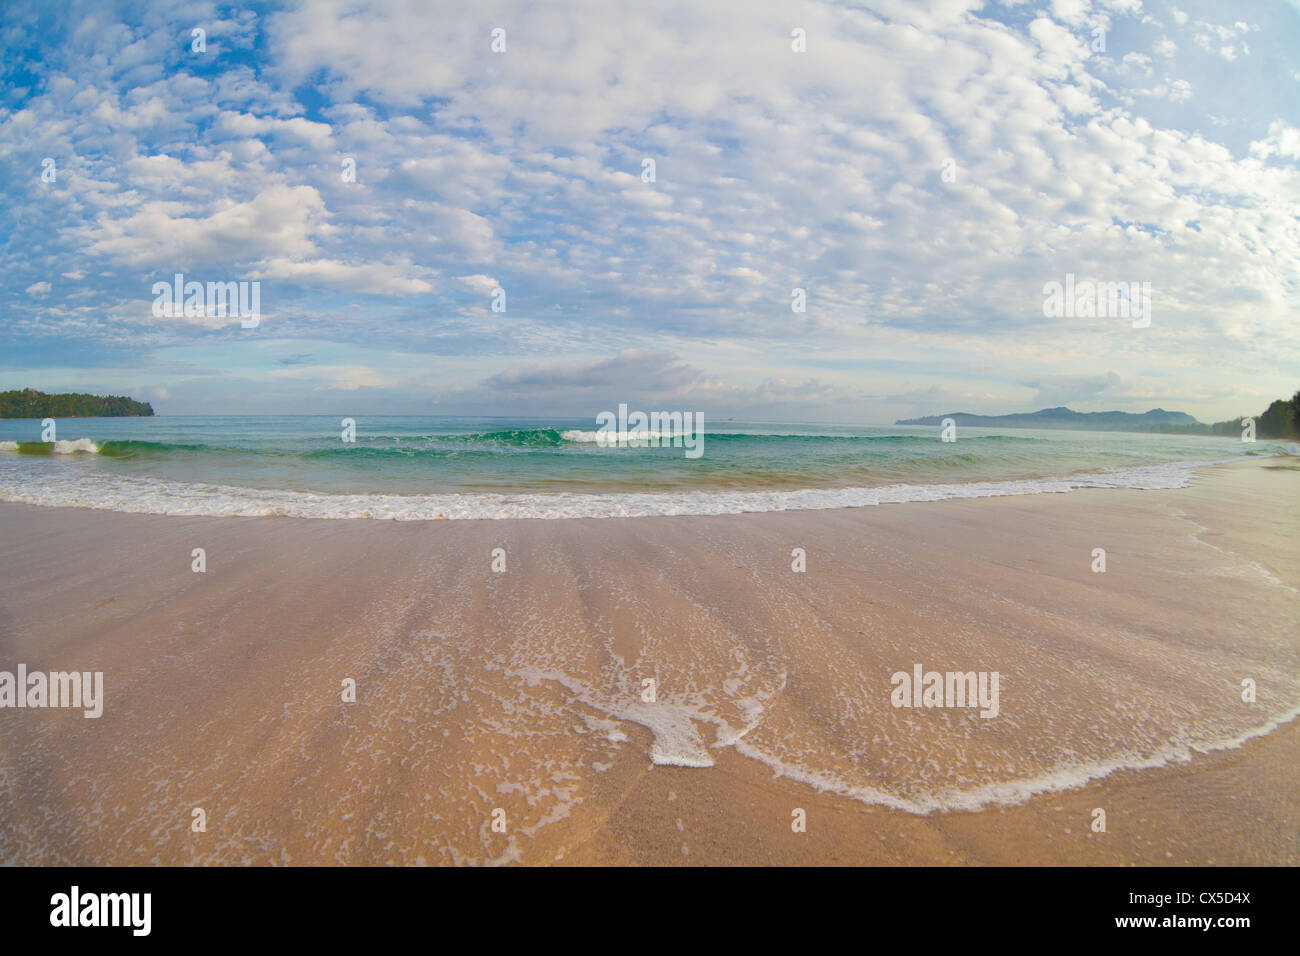 wide angle shot of tropical beach Stock Photo